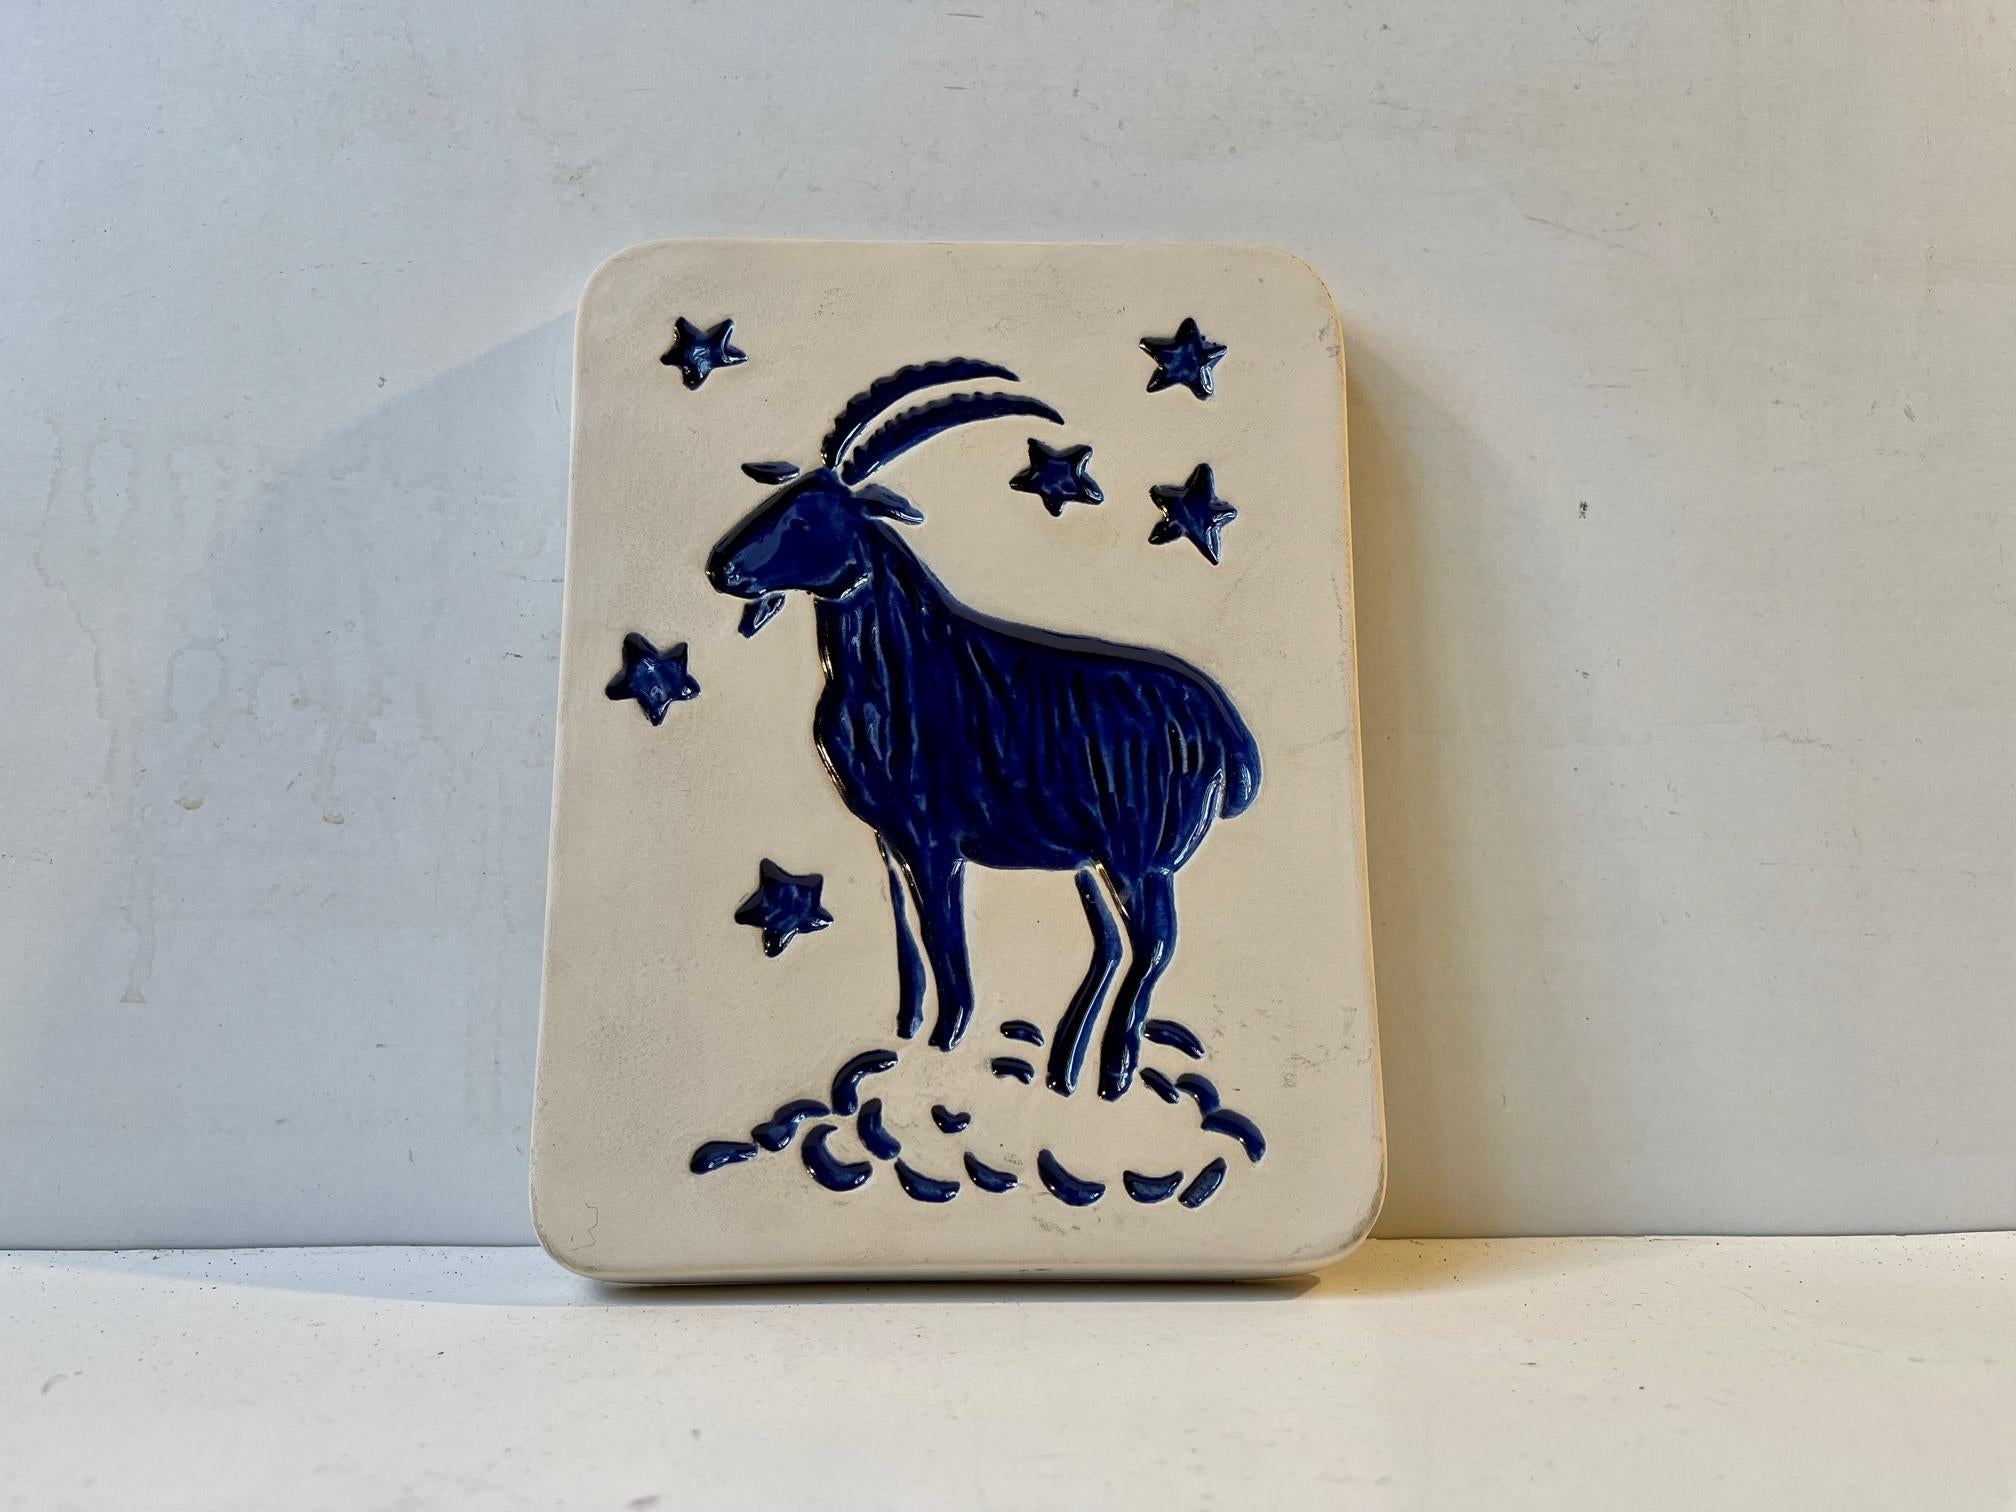 Ceramic wall plaque decorated with blue glaze. It depicts the Zodiac sign: The Capricon. Designed by Vallis and made at Gabriel Ceramic Studio in Sweden during the 1970s. Measurements: H: 16.5 cm, W: 13 cm, Dept: 2 cm.